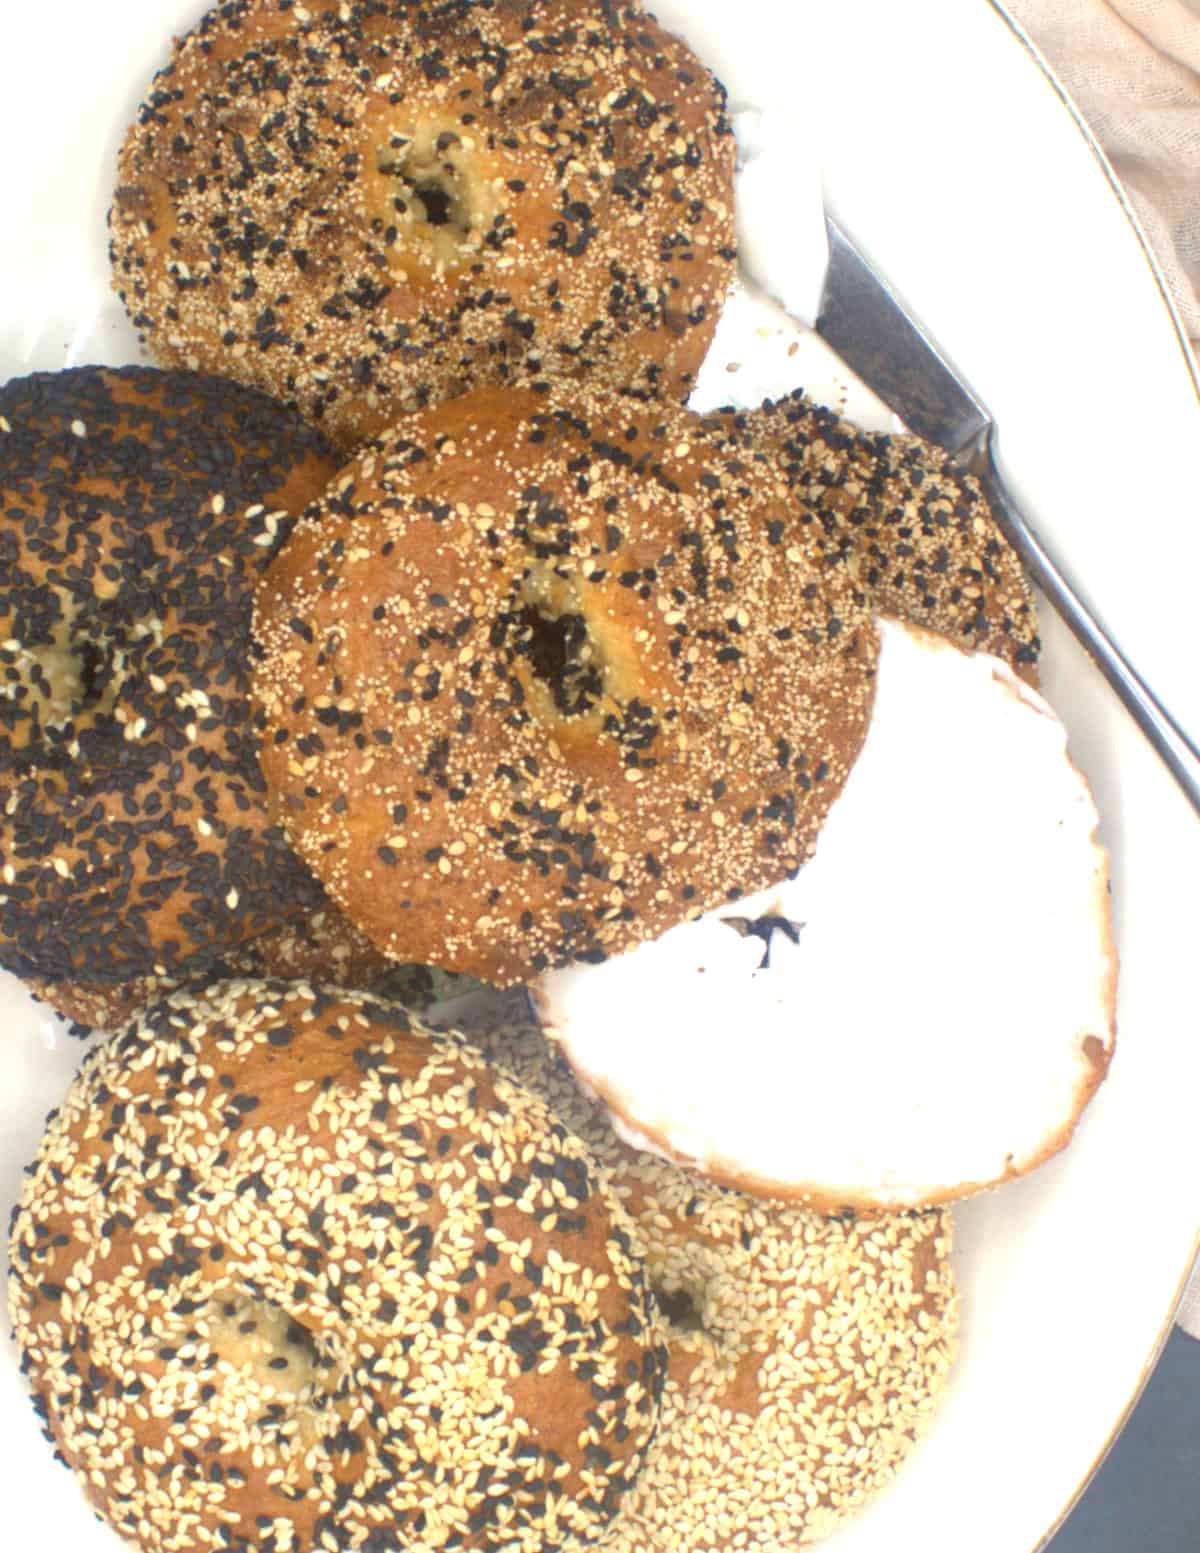 Vegan bagels on platter, one open with a schmear of vegan cream cheese.